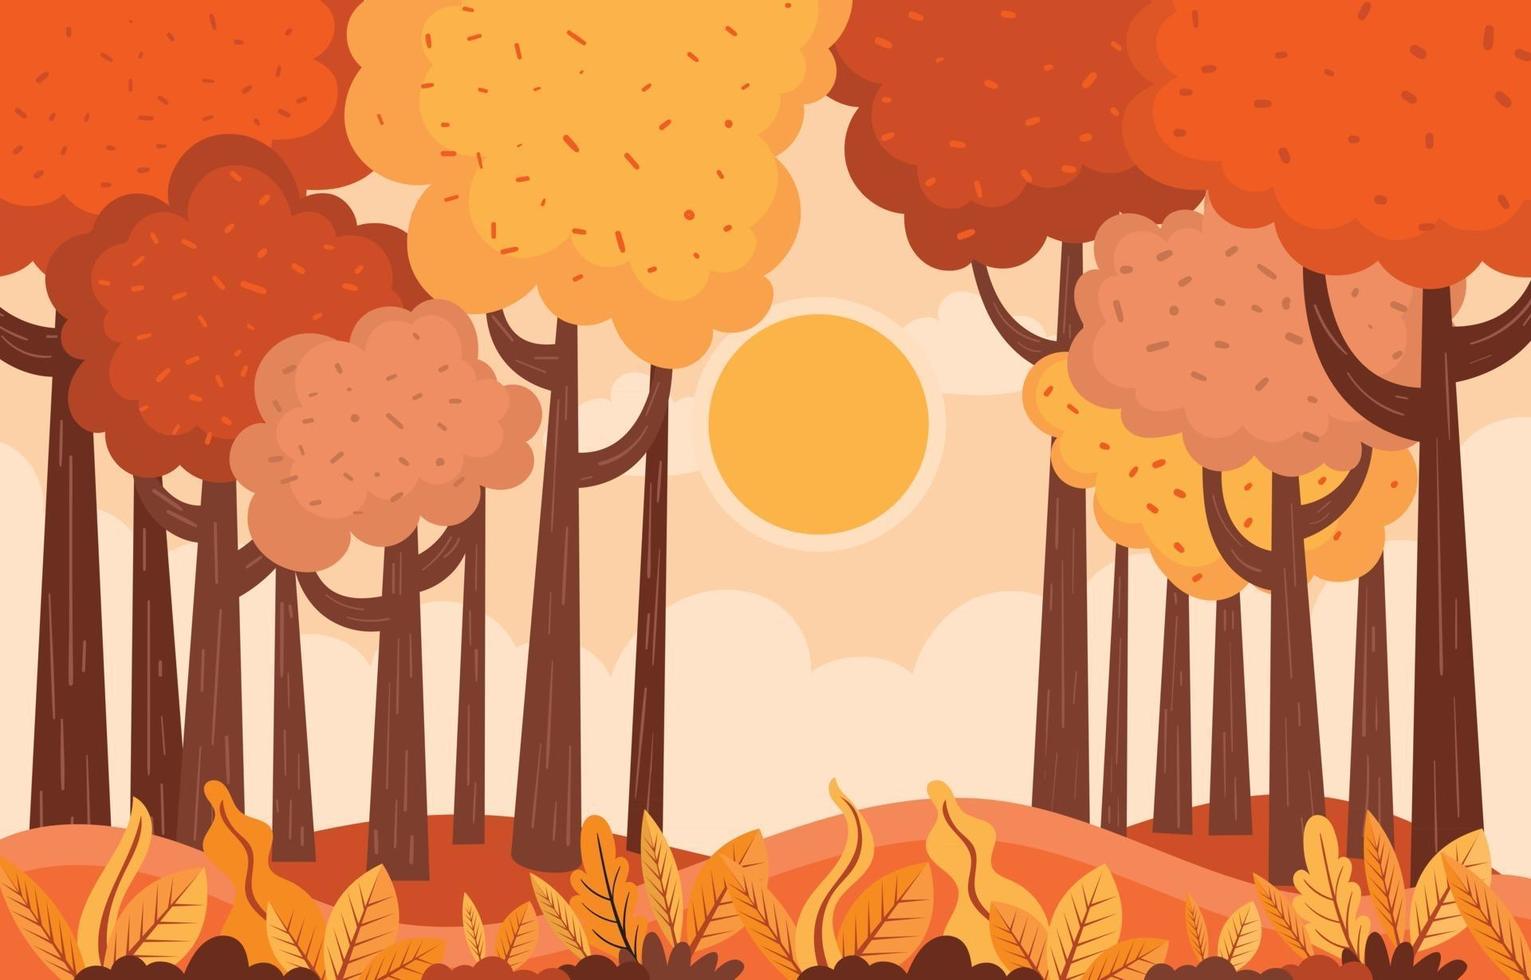 Bright Orange Afternoon during Fall Season Background vector